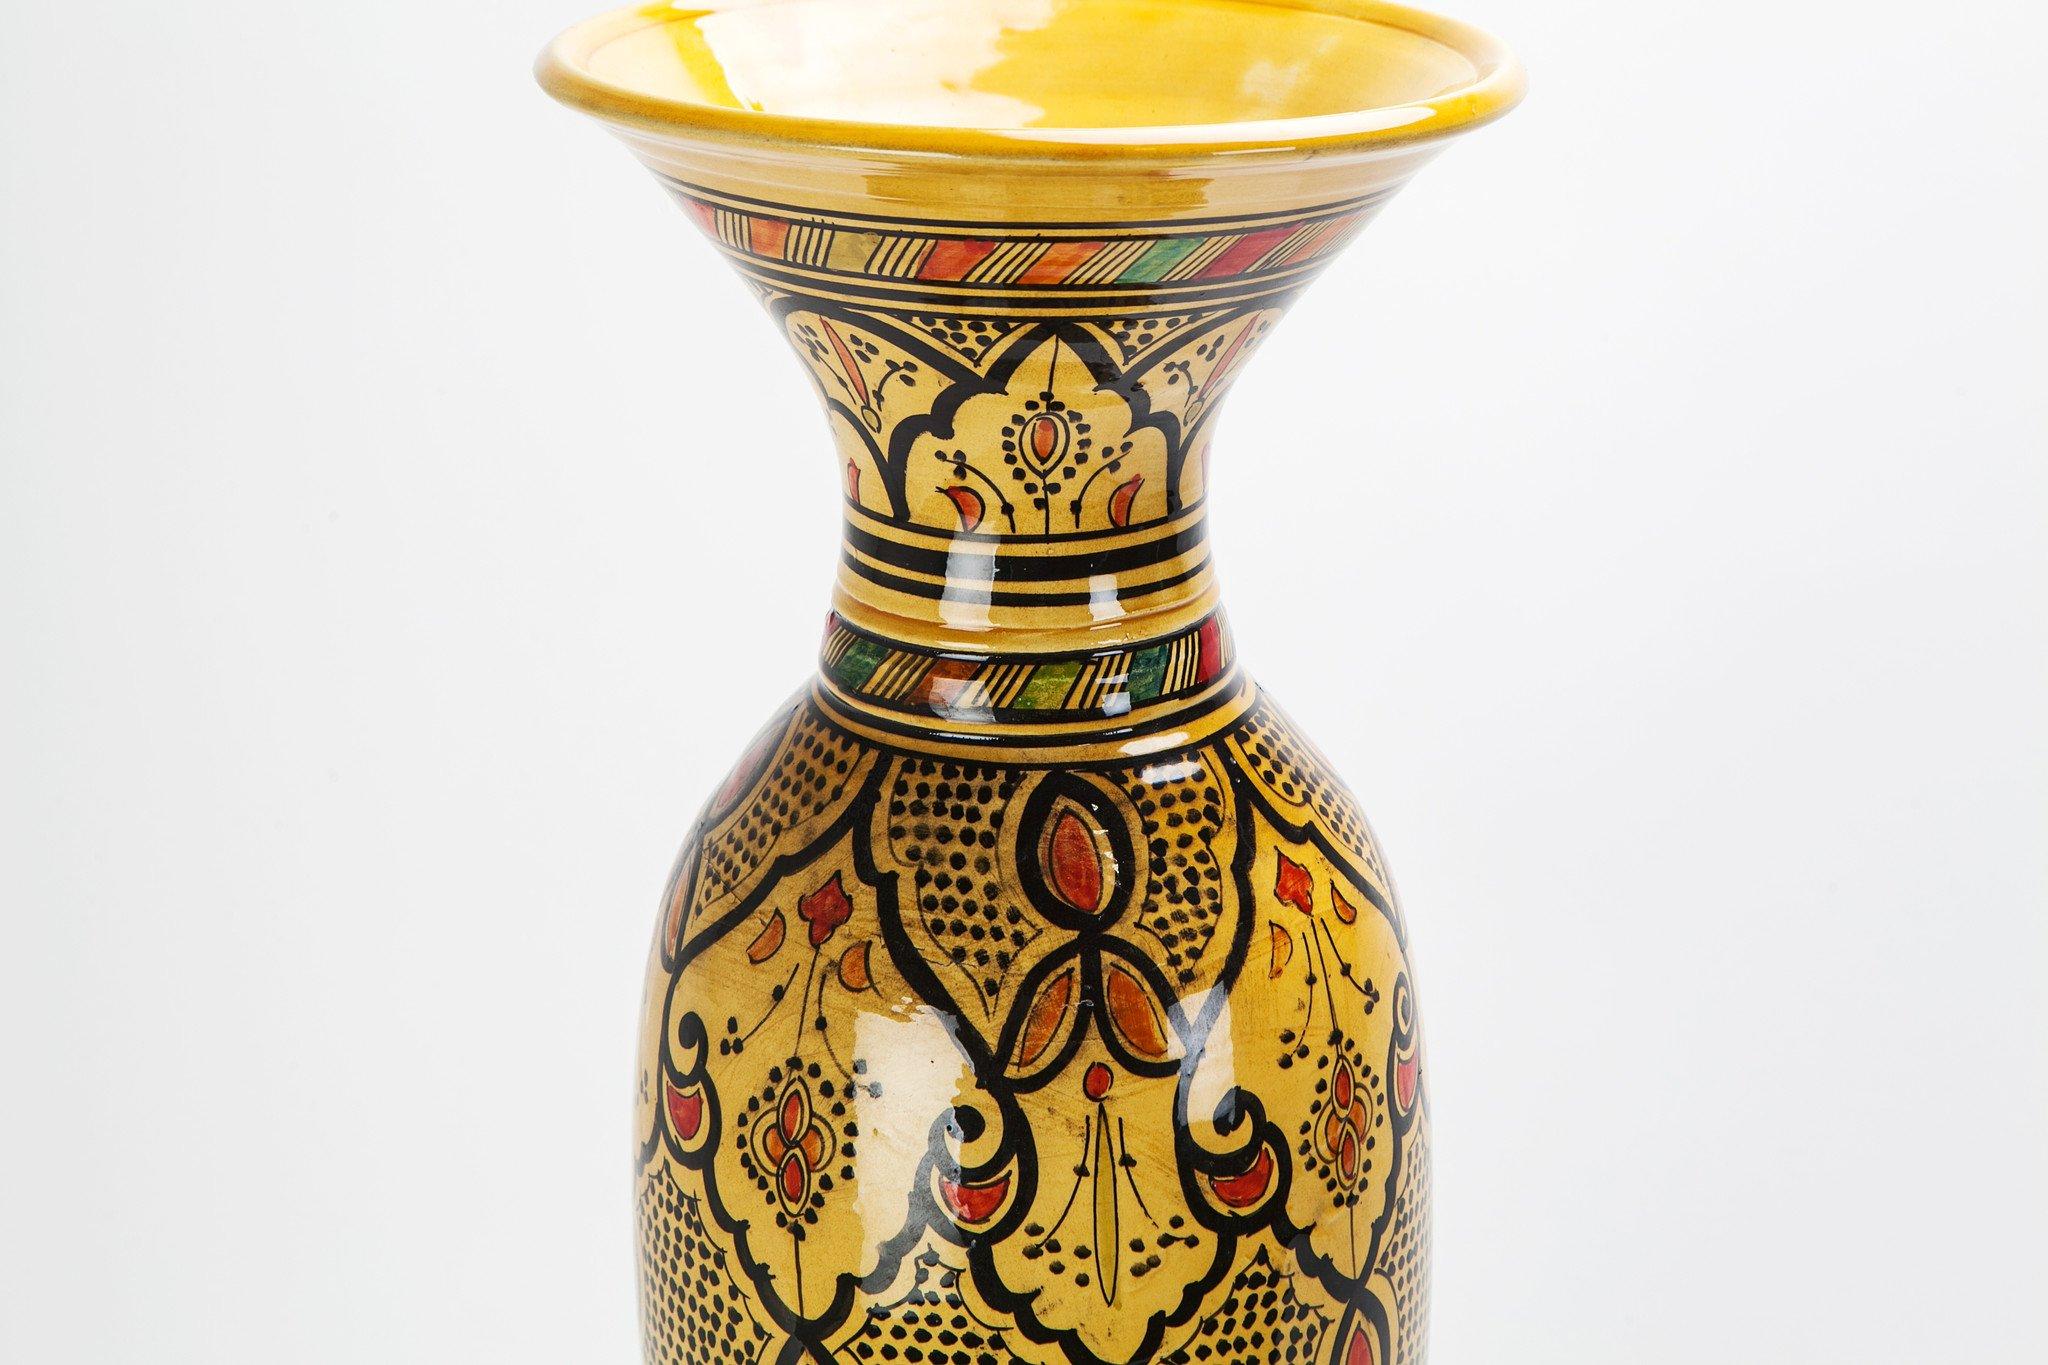 With its intriguing cone-shaped design, absorbing rustic colors of yellow, orange and black, and an elaborately ornate pattern, this visually potent handcrafted vintage vase is the ideal addition to any room in need of exotic elegance. The vase was